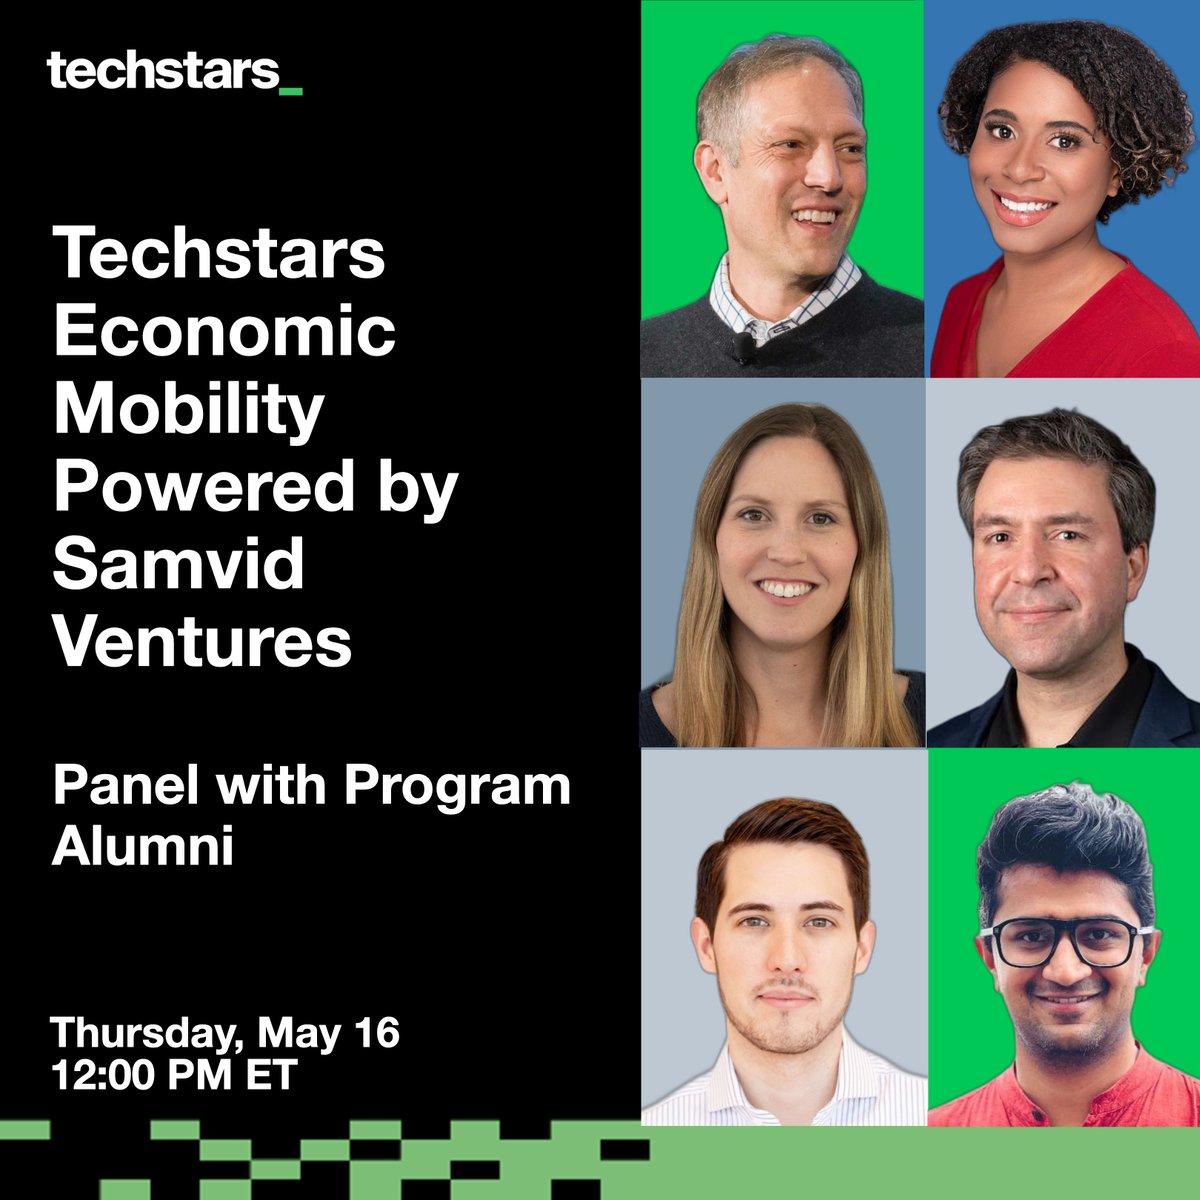 In this alumni panel, ​hear from Techstars Economic Mobility Powered by Samvid Ventures founders about their accelerator experience, tips on applications, progress during program, and leveraging the network post-program. 📆 May 16th at 12:00 pm ET 🔗 tsta.rs/CXjV50RvUJj